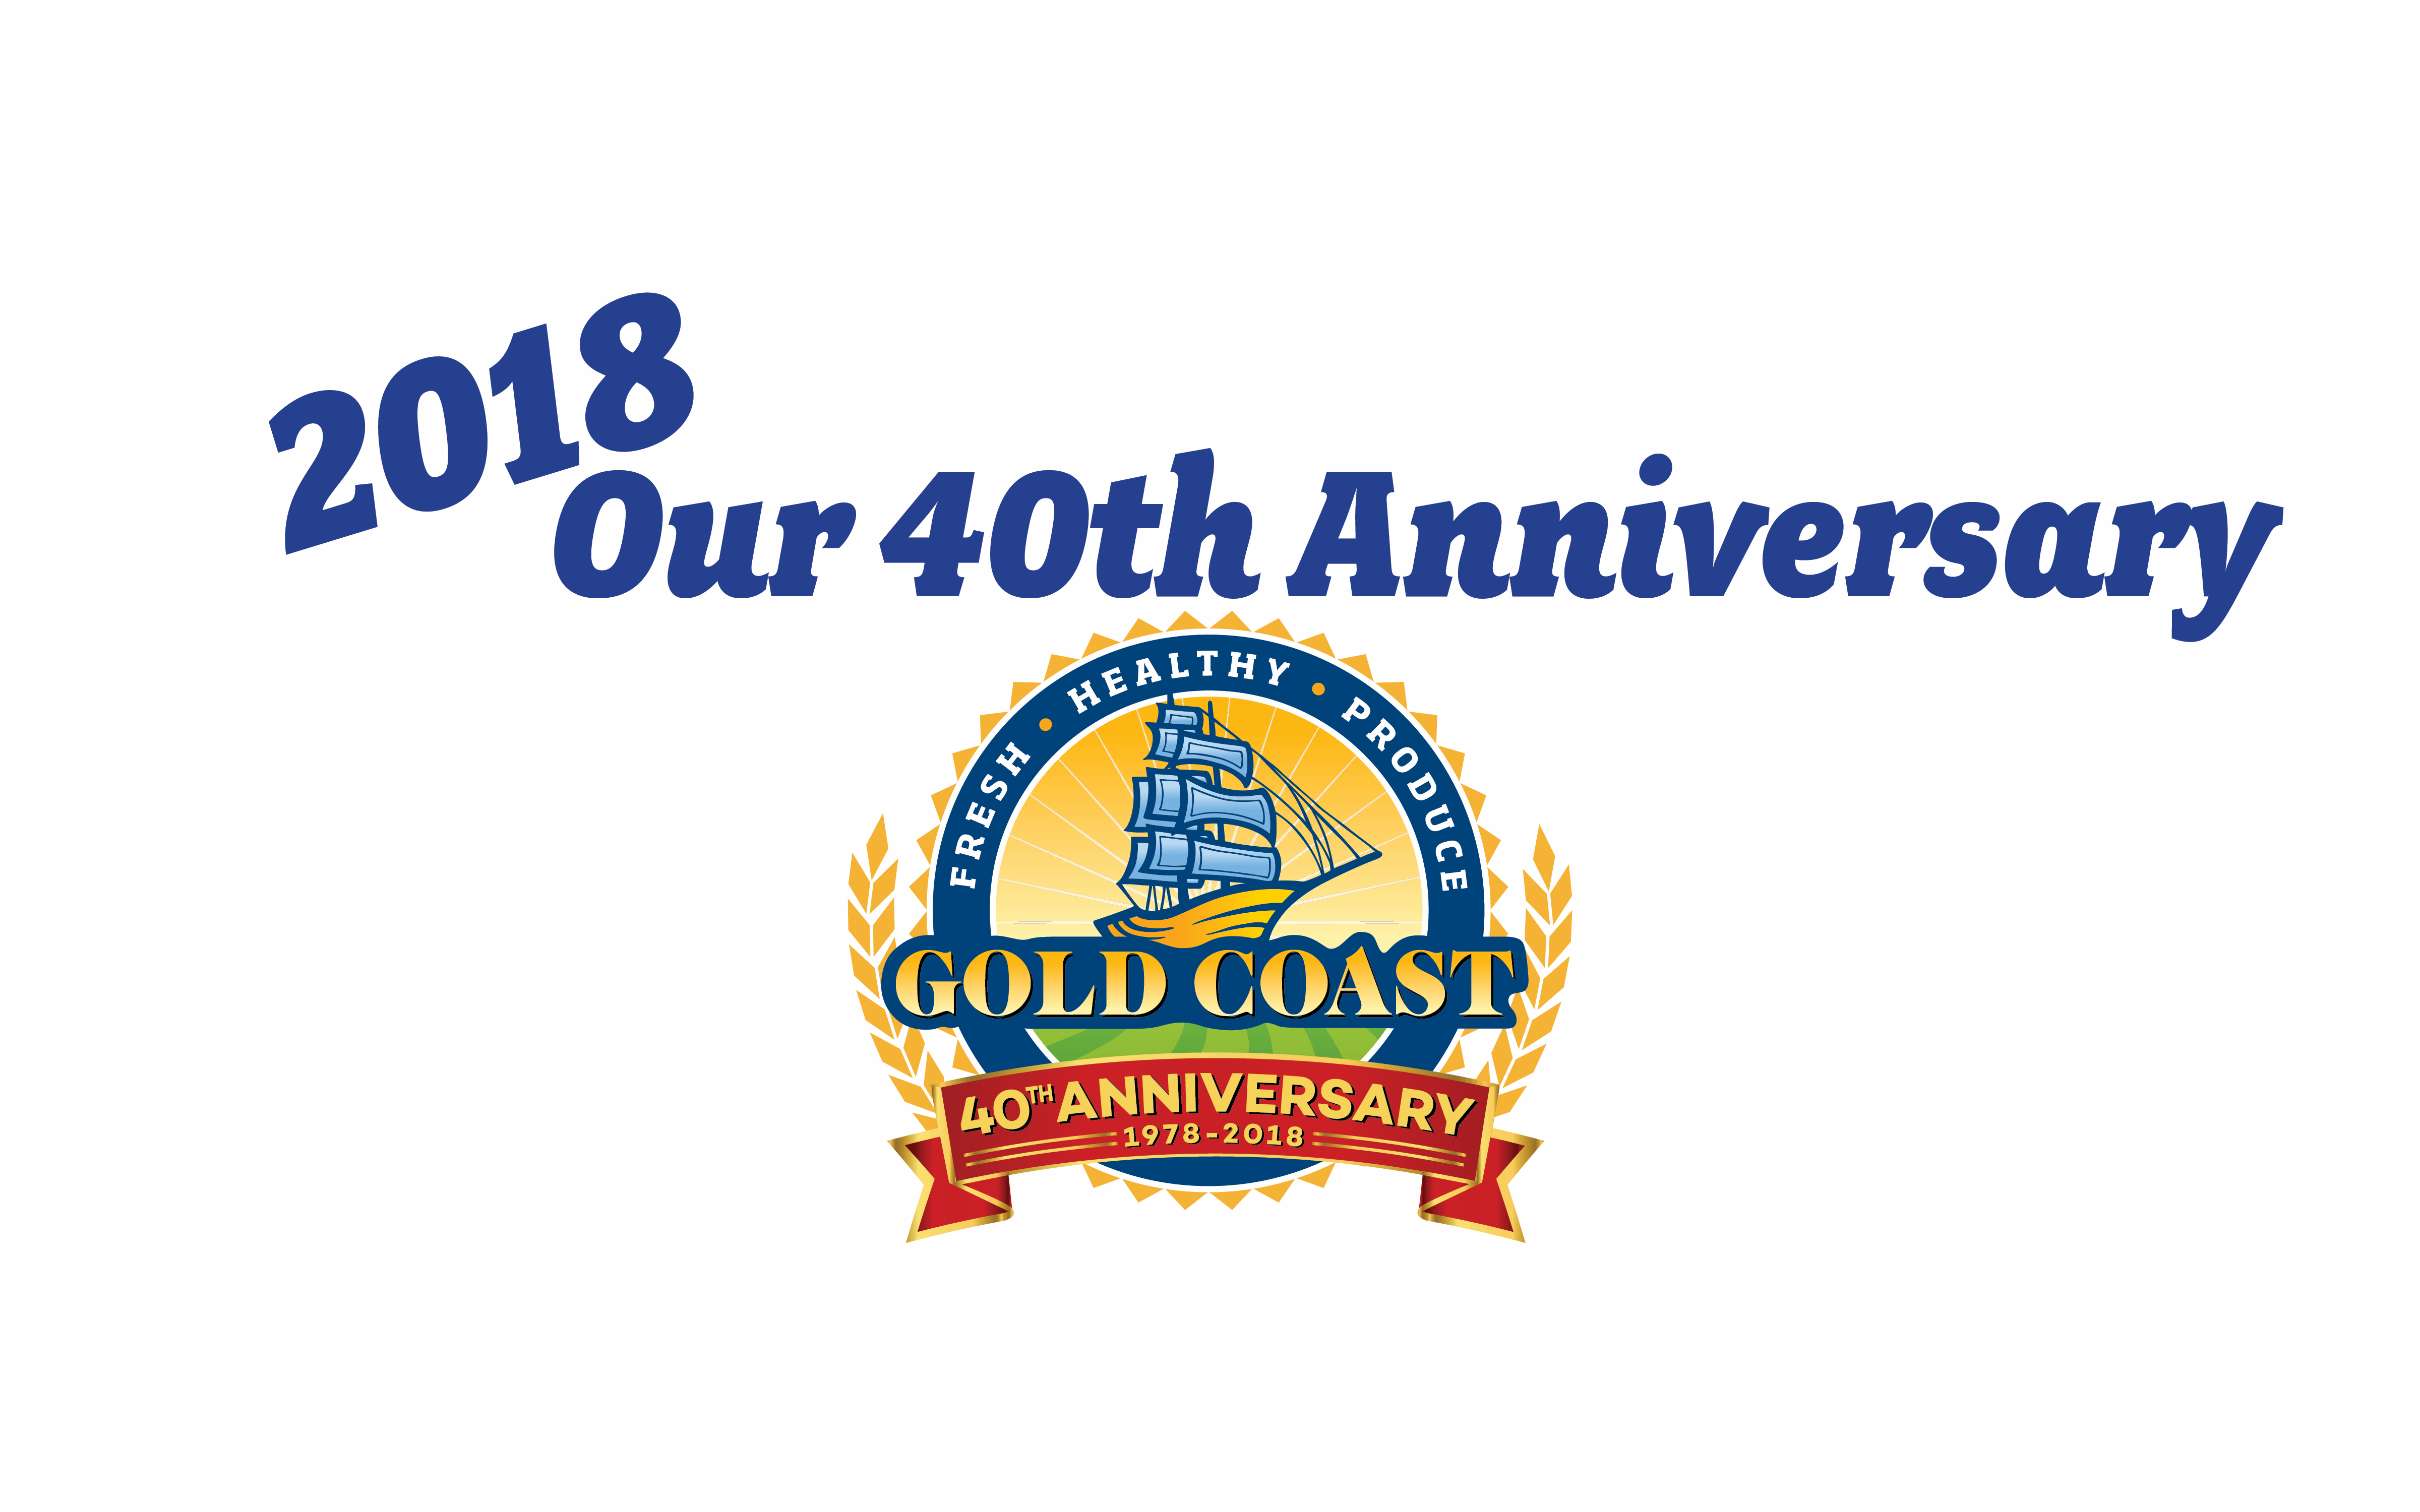 A Look Back at 2018: Our 40th Anniversary